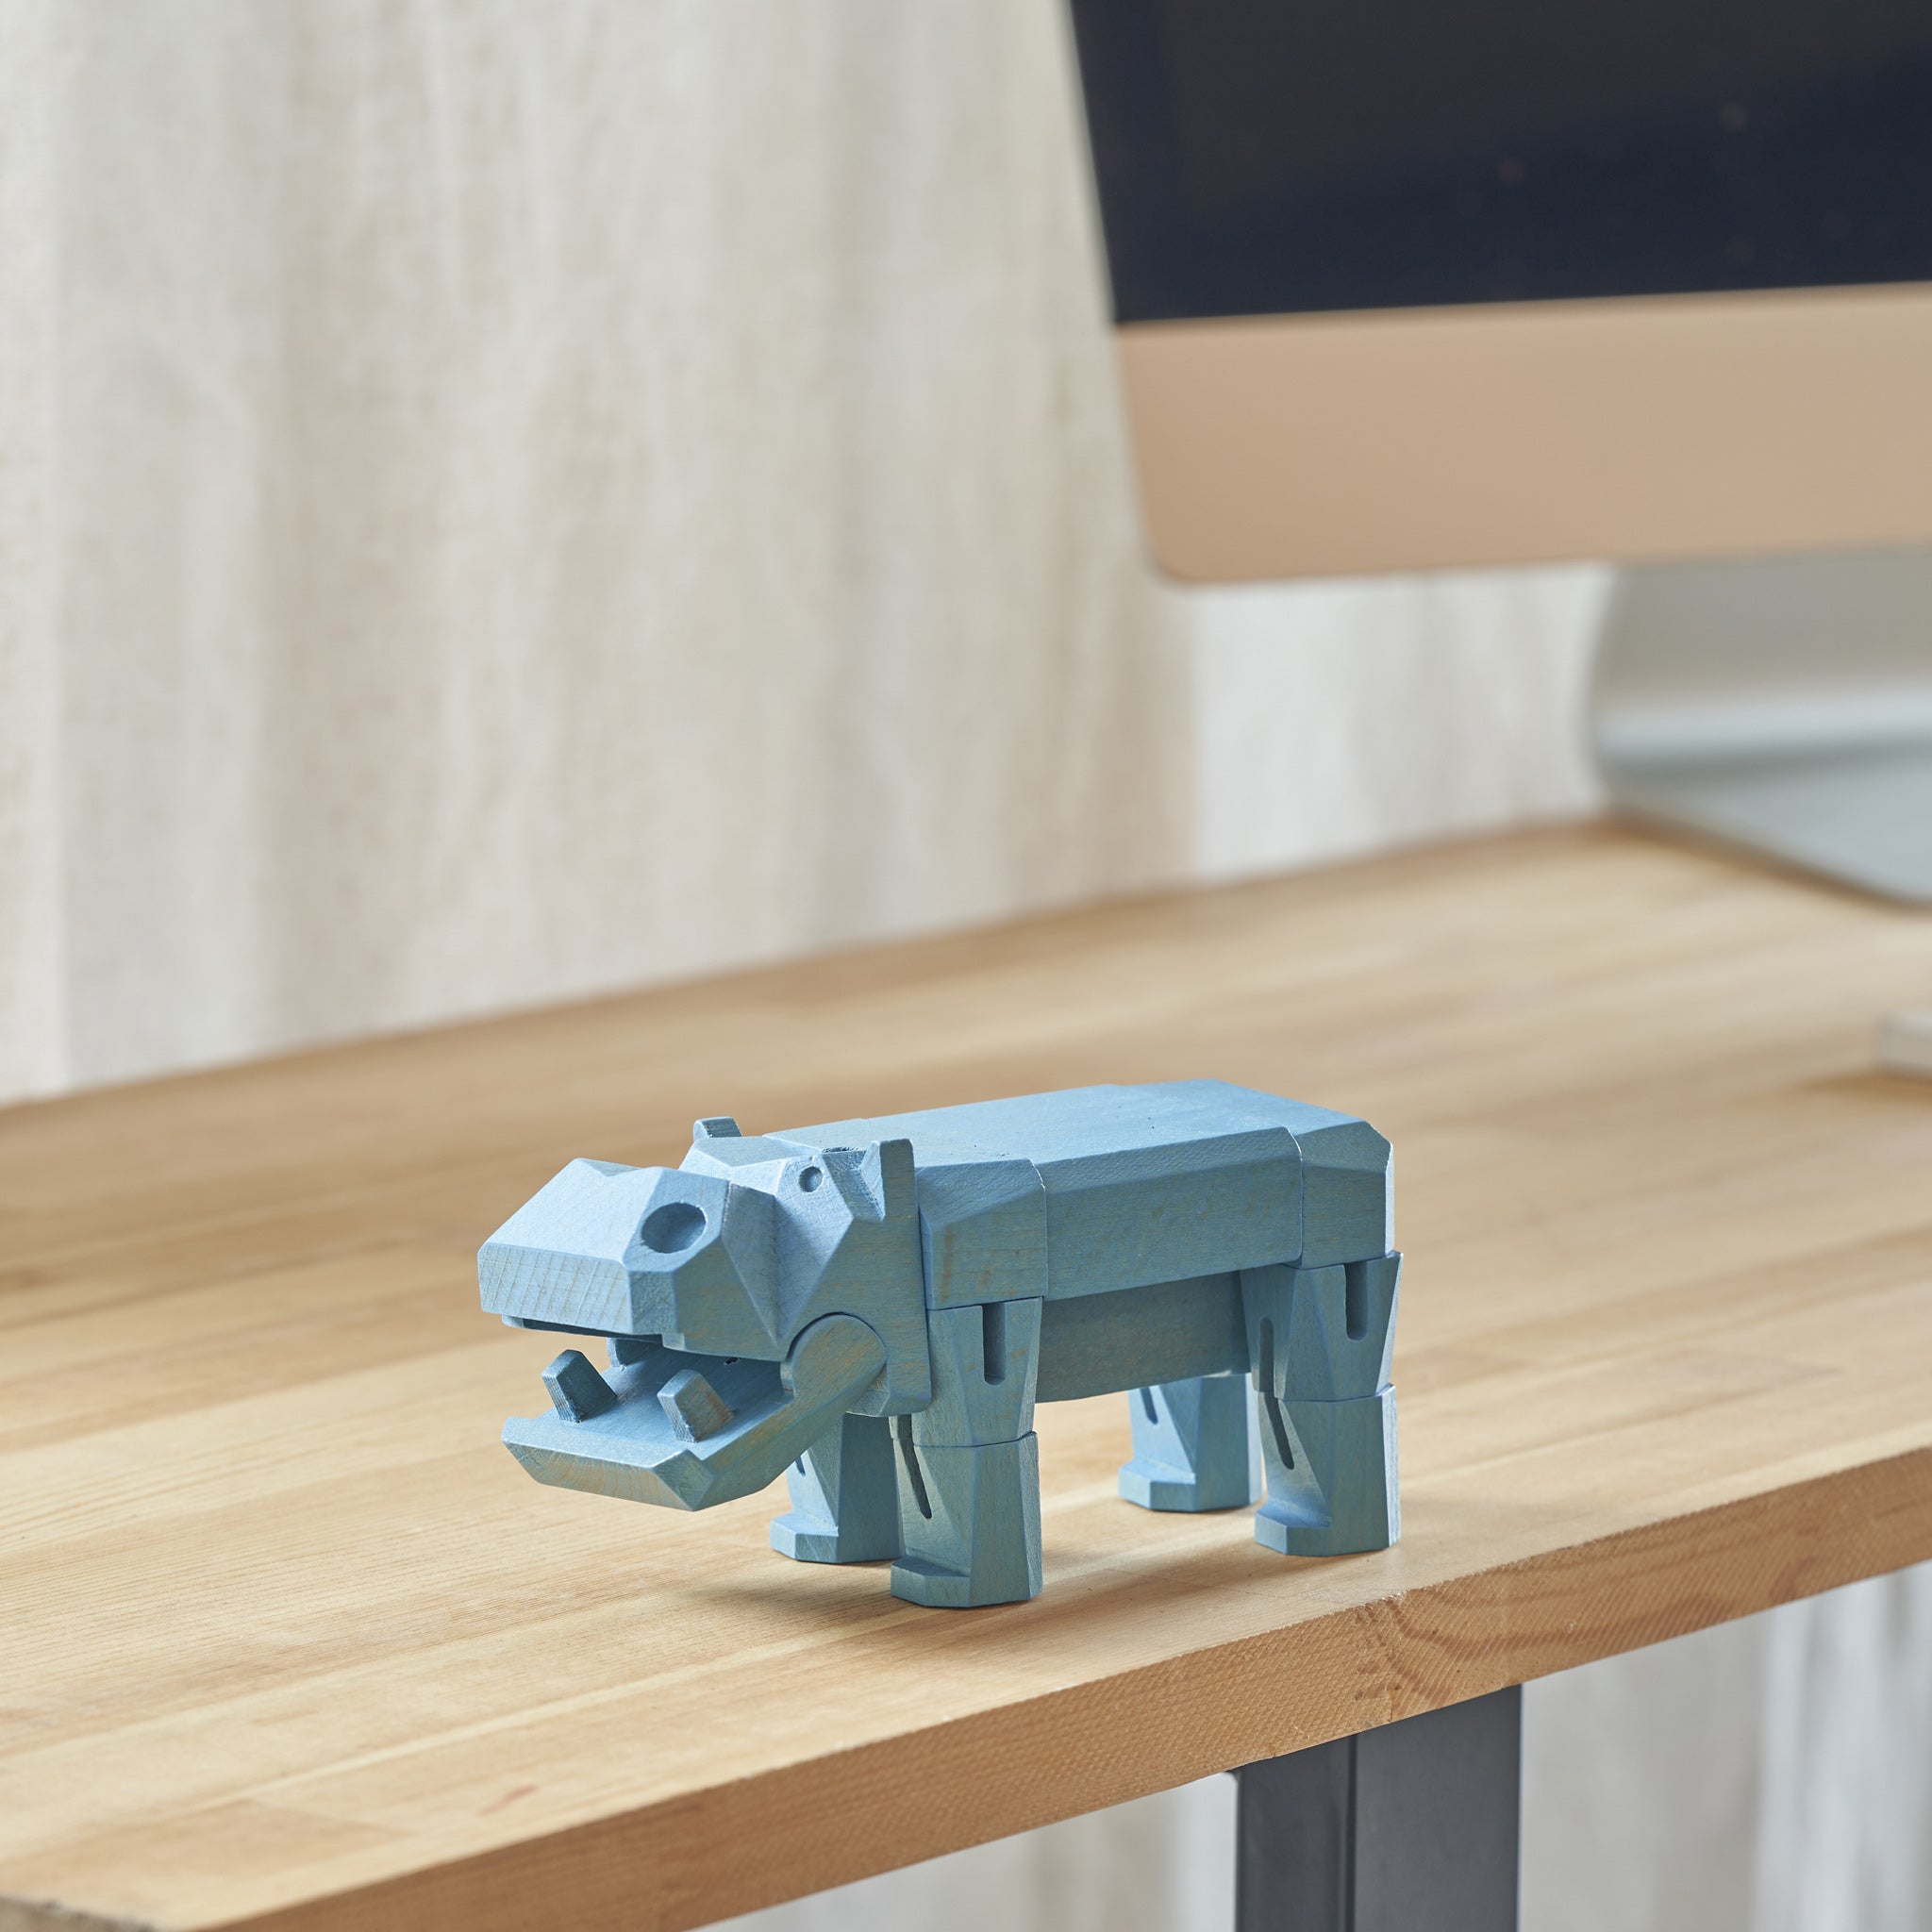 Morphits ® Hippo Wooden Toy Playset Puzzle Light Blue Computer